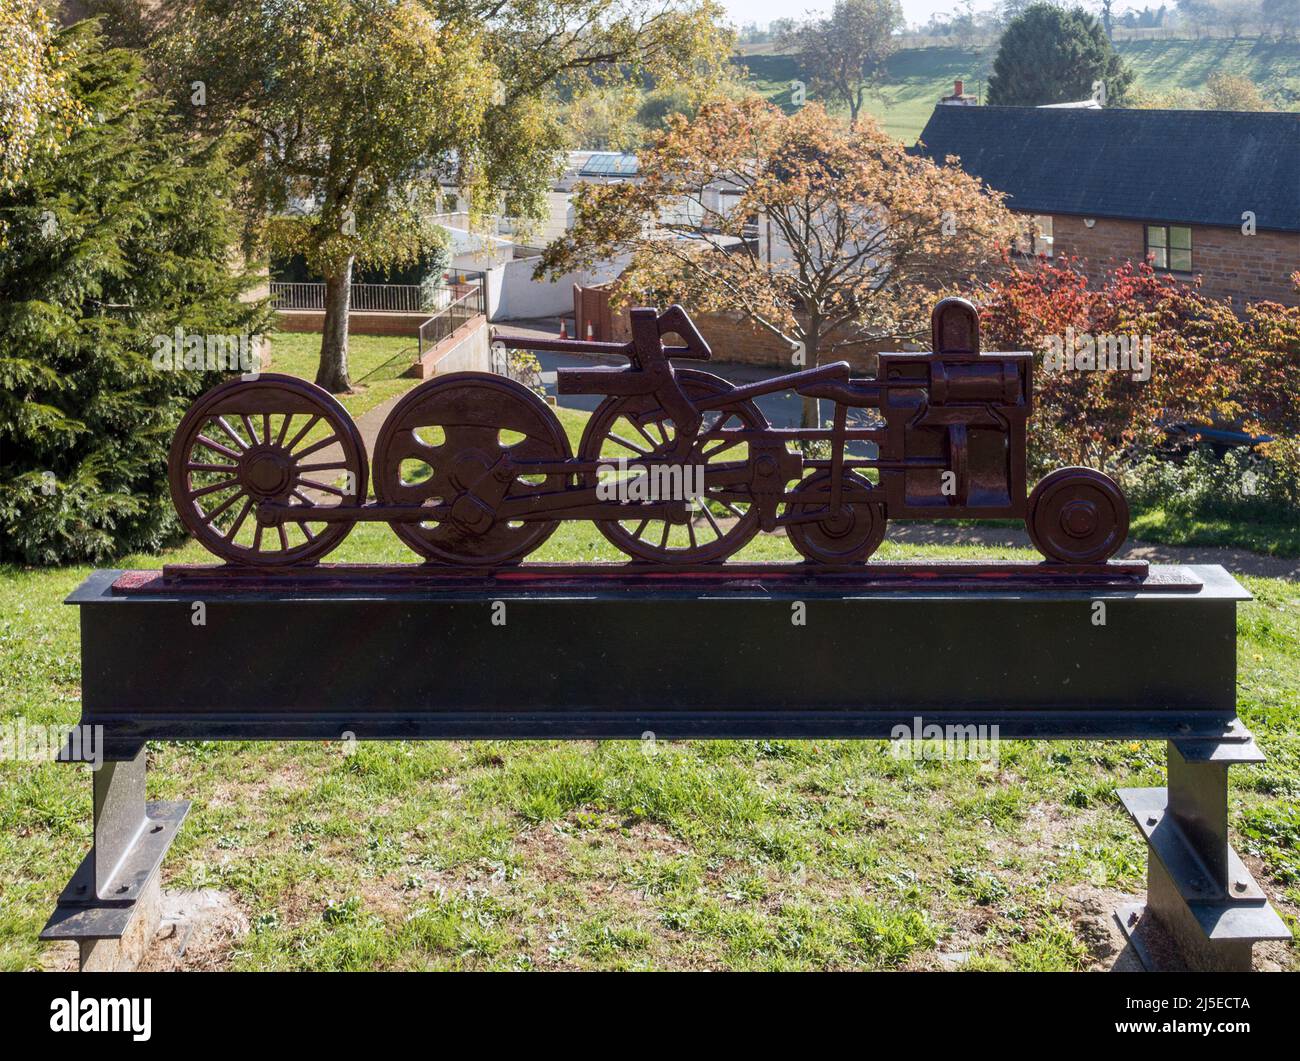 Uppingham railway station site memorial featuring a metal model / sculpture depicting steam train locomotive wheels, South View, Uppingham, Rutland. Stock Photo